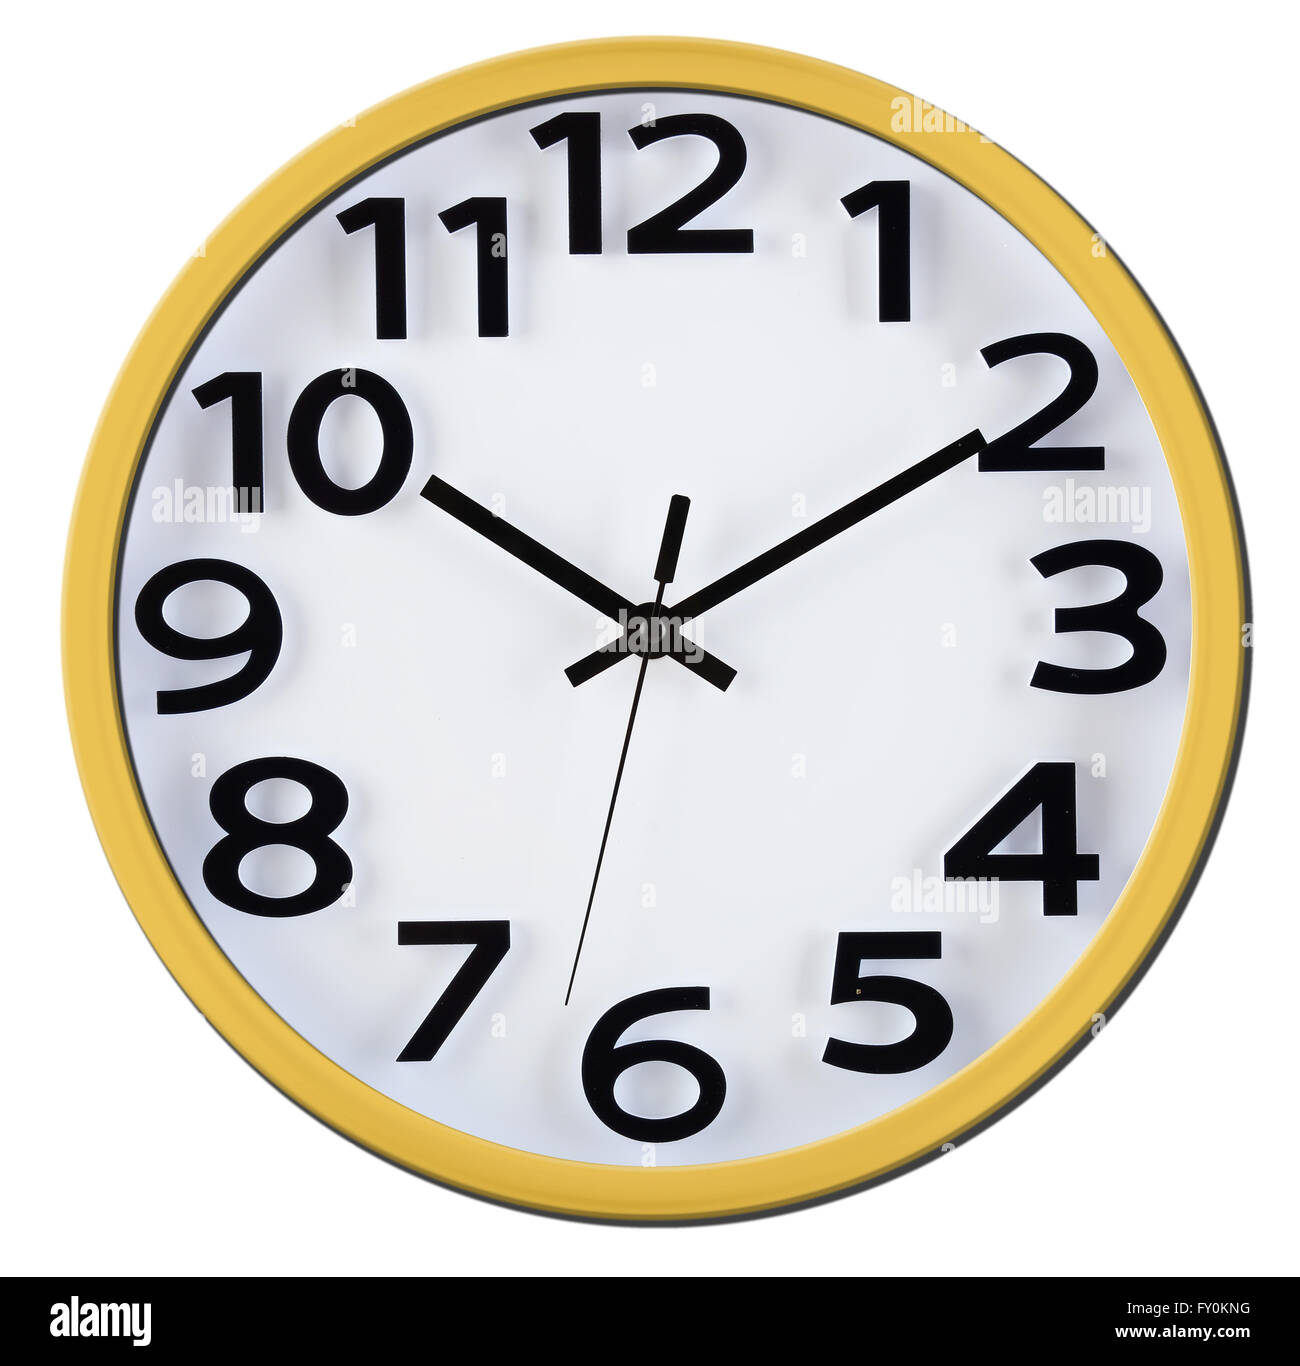 Wall clock isolated on white background. Ten past ten Stock Photo - Alamy